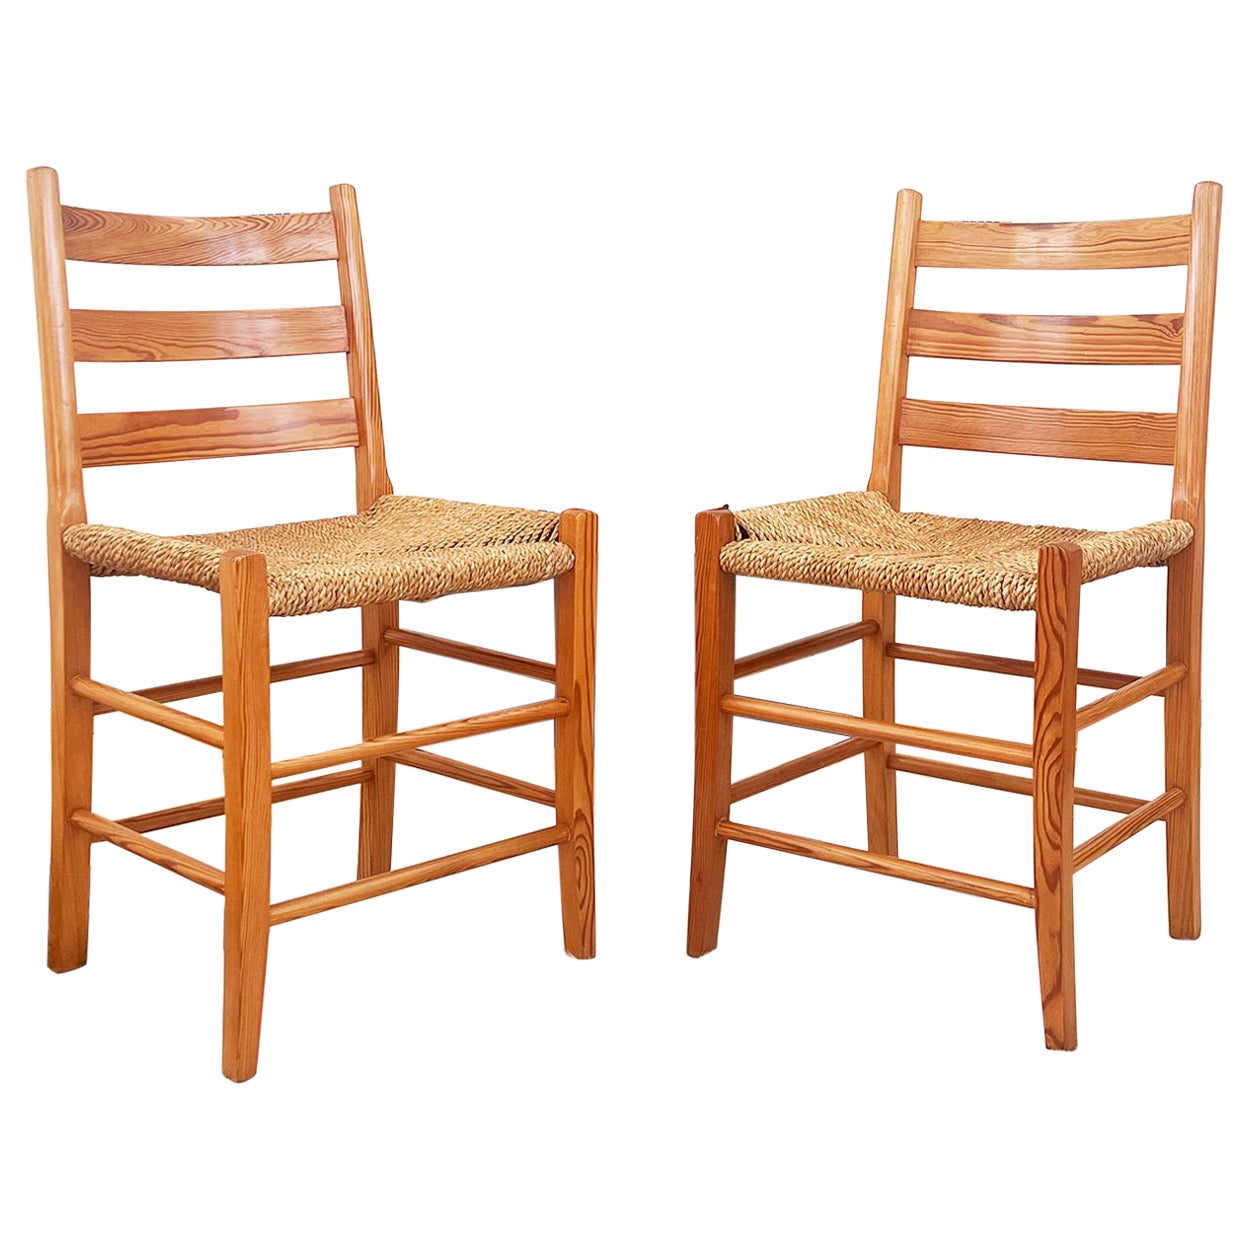 Swedish 1970s Pine Ladder back Chairs with Rope woven seats -- Pair For Sale